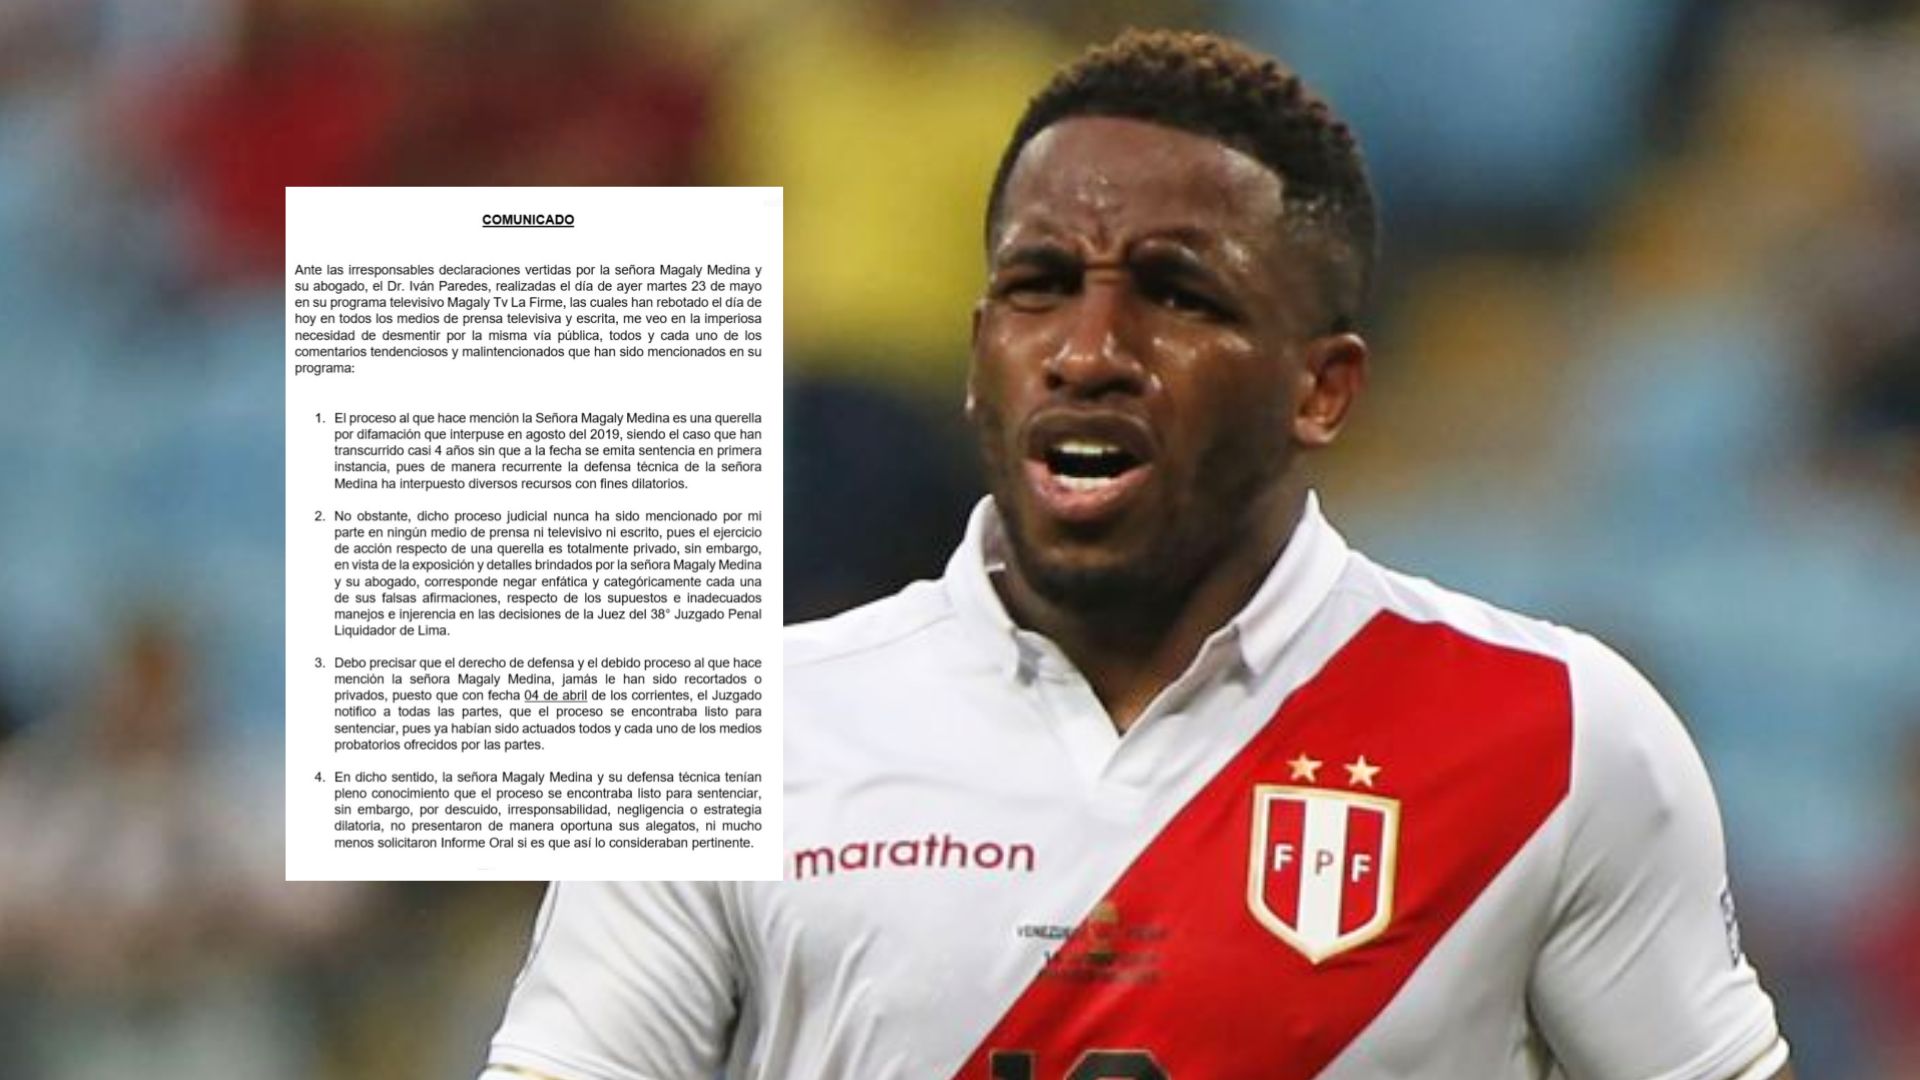 Jefferson Farfán spoke about his legal conflict with Magaly Medina.